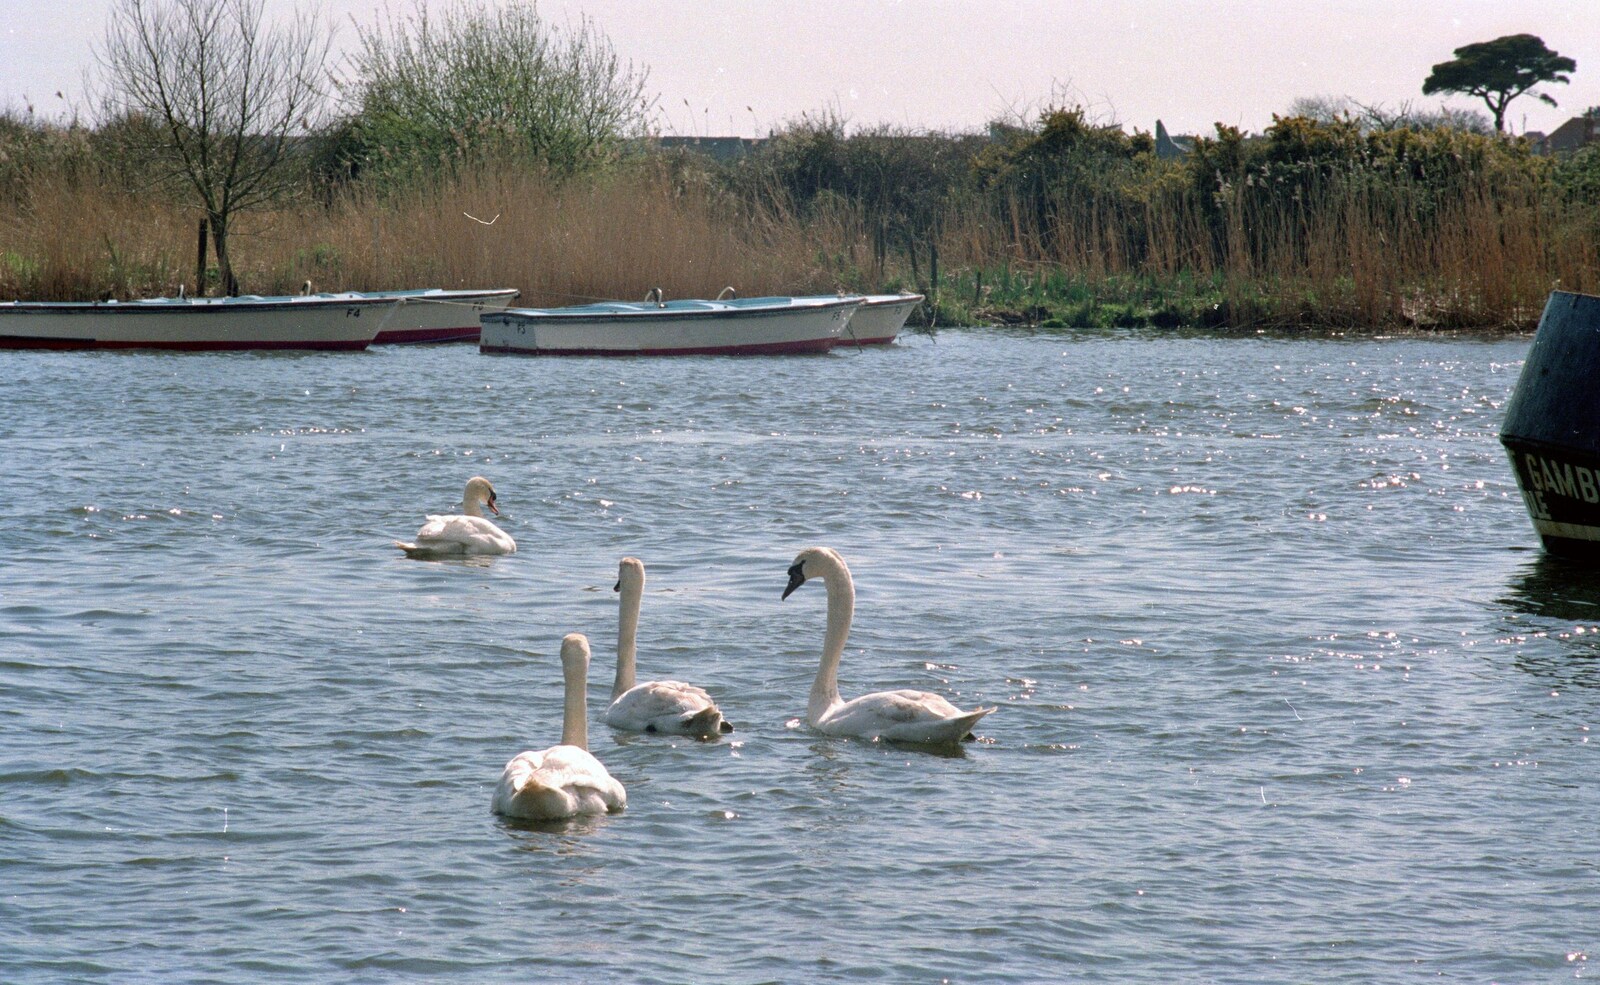 The Vineyard, Christchurch and Pizza, New Milton and the New Forest - 2nd April 1989: Swans at Christchurch